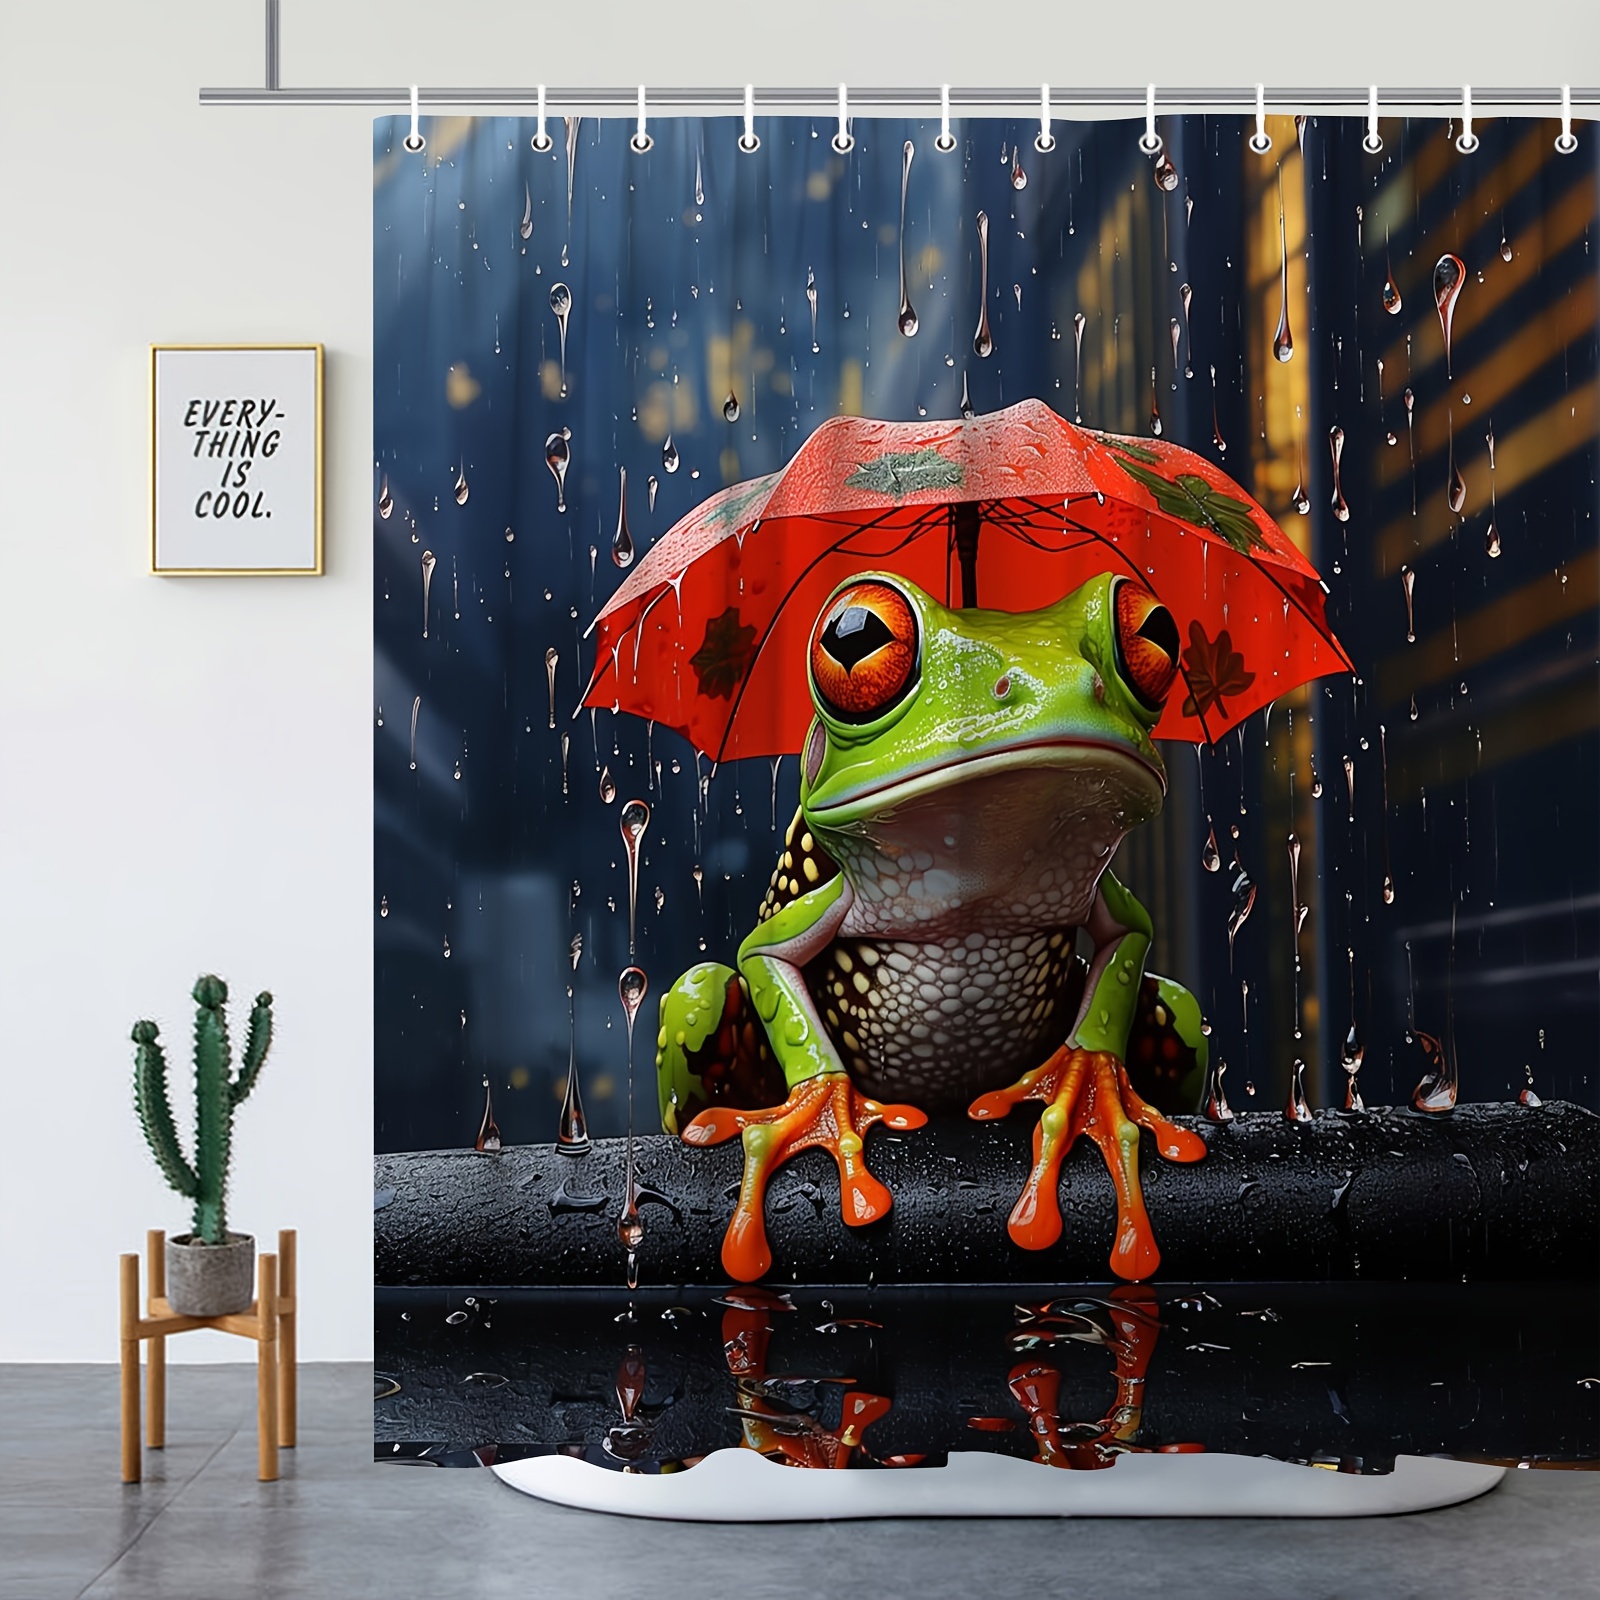 Tree Frog Design Bahtroom Polyester Shower Curtain With My Art Design. Frog  Garden Bug Shower Curtain. 